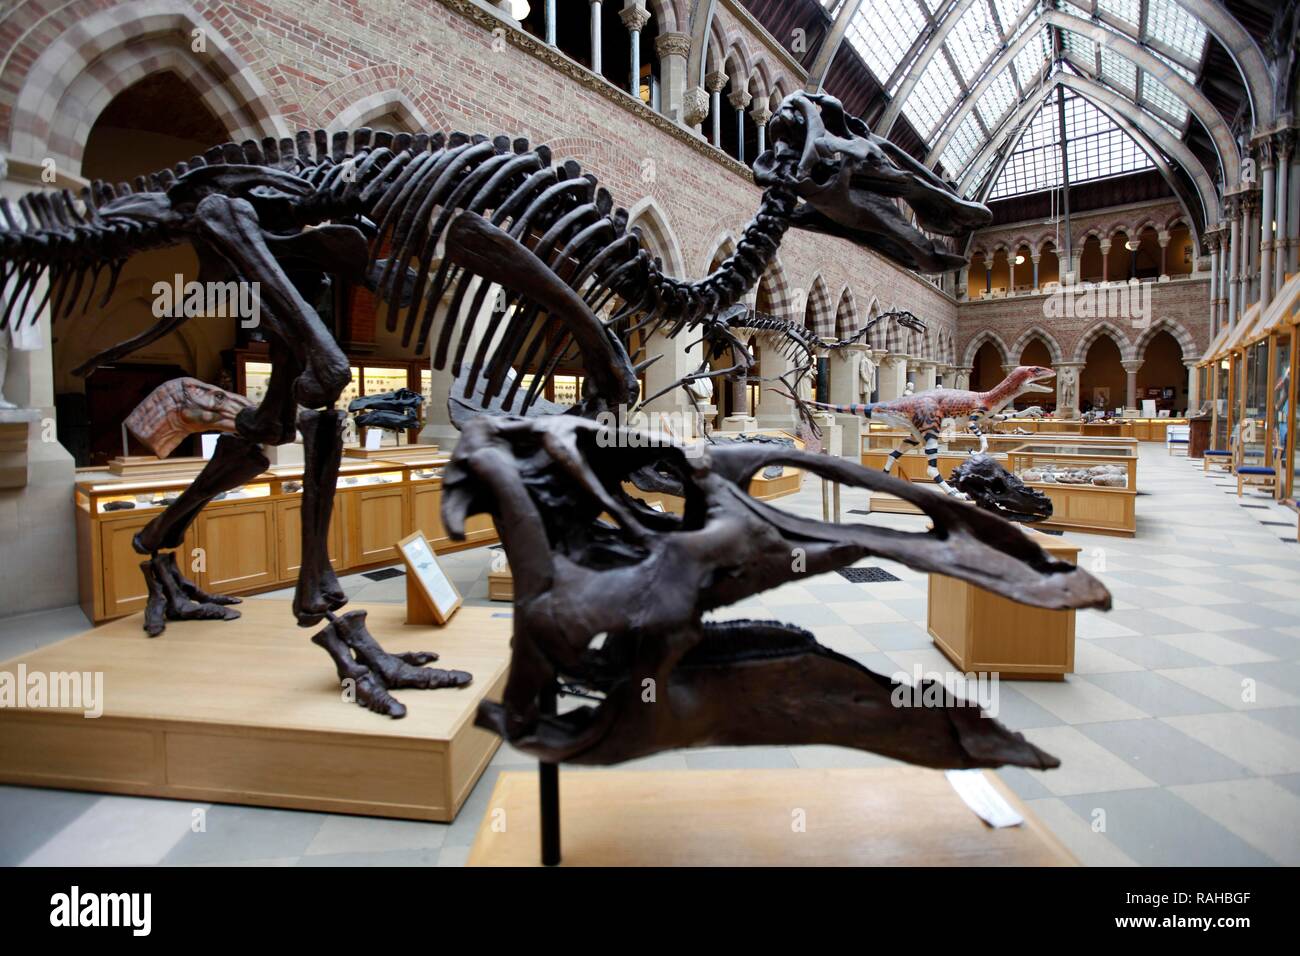 Oxford University Museum of Natural History, University of Oxford, Oxford, Oxfordshire, Angleterre, Royaume-Uni, Europe Banque D'Images